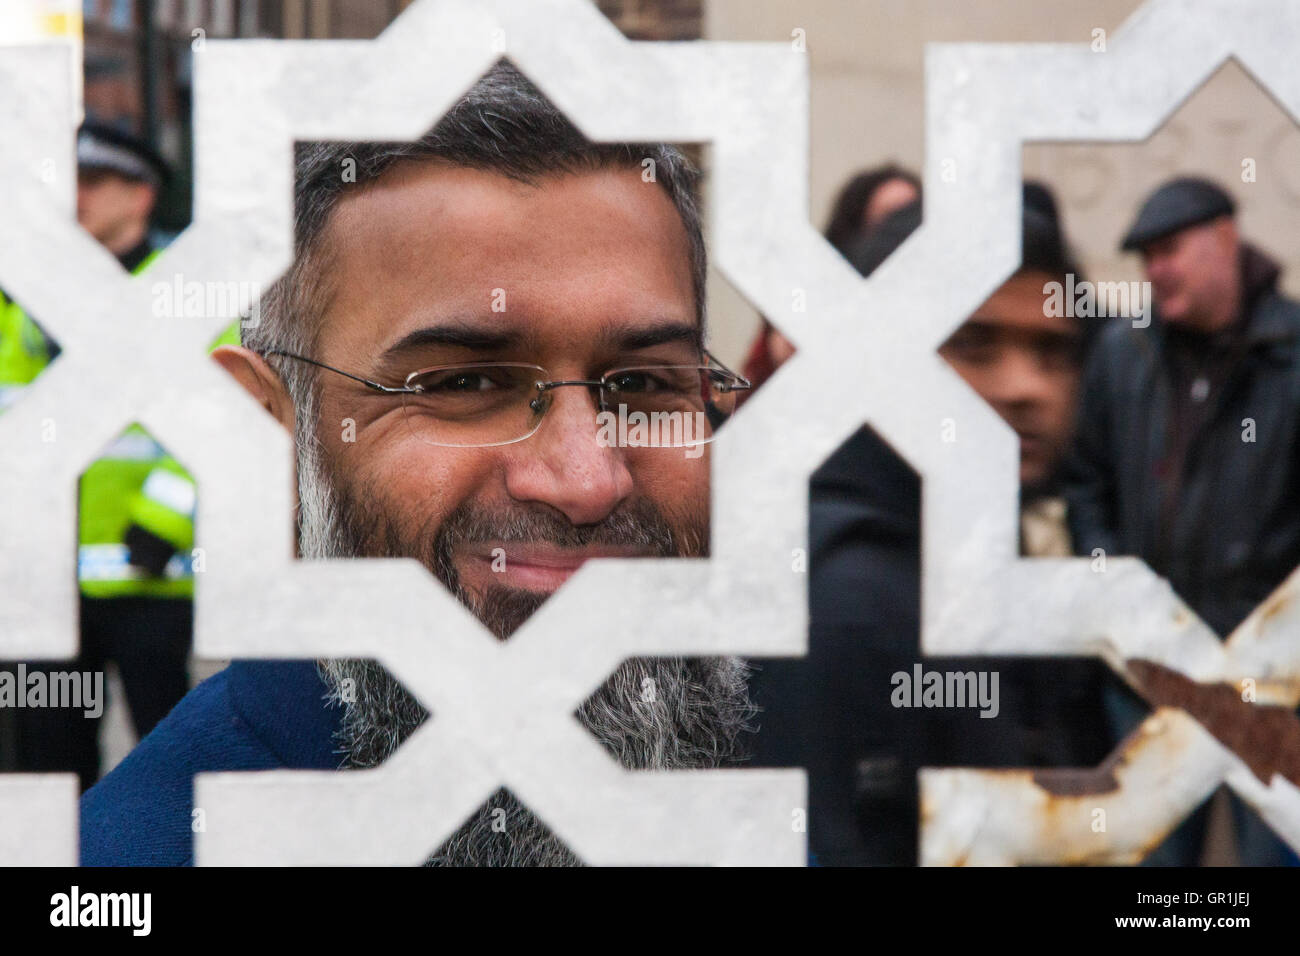 Brick Lane, London, December 13th 2013. Anjem Choudary, pictured, leads his 'Sharia Project' as they demonstrate in Brick Lane against the consumption of Alchohol blaming most of society's ills on drinking, and demanding that strict Sharia law be imposed to replace 'man-made' laws. Credit:  Paul Davey/Alamy Live News Stock Photo